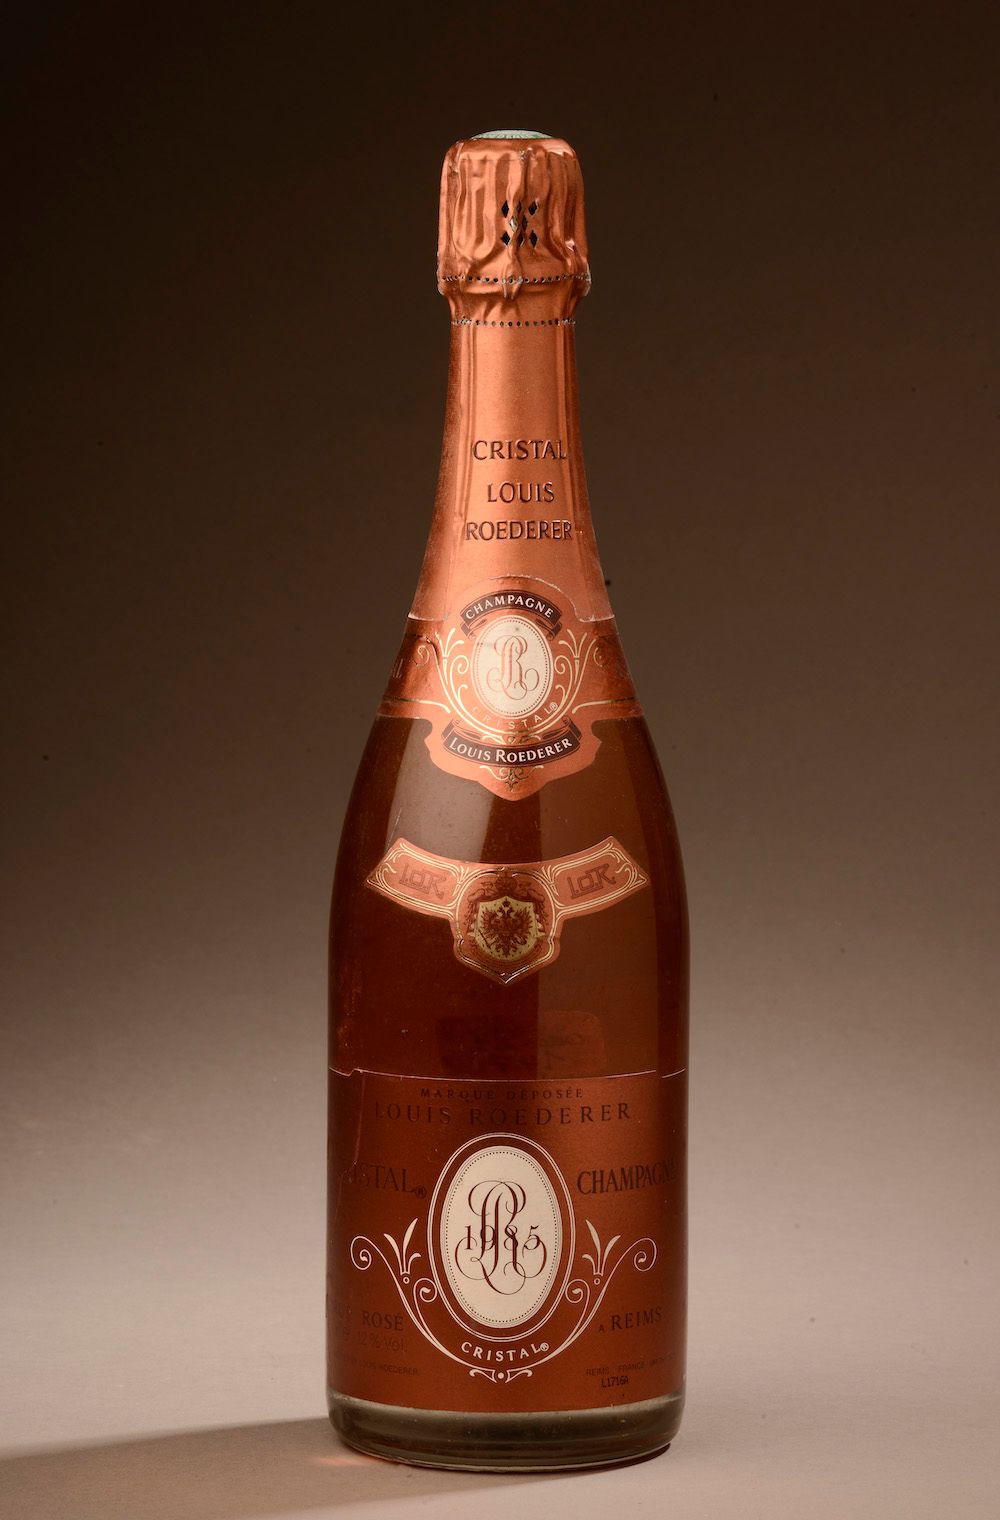 Null 1瓶CHAMPAGNE "Cristal", L. Roederer 1985 (桃红葡萄酒)